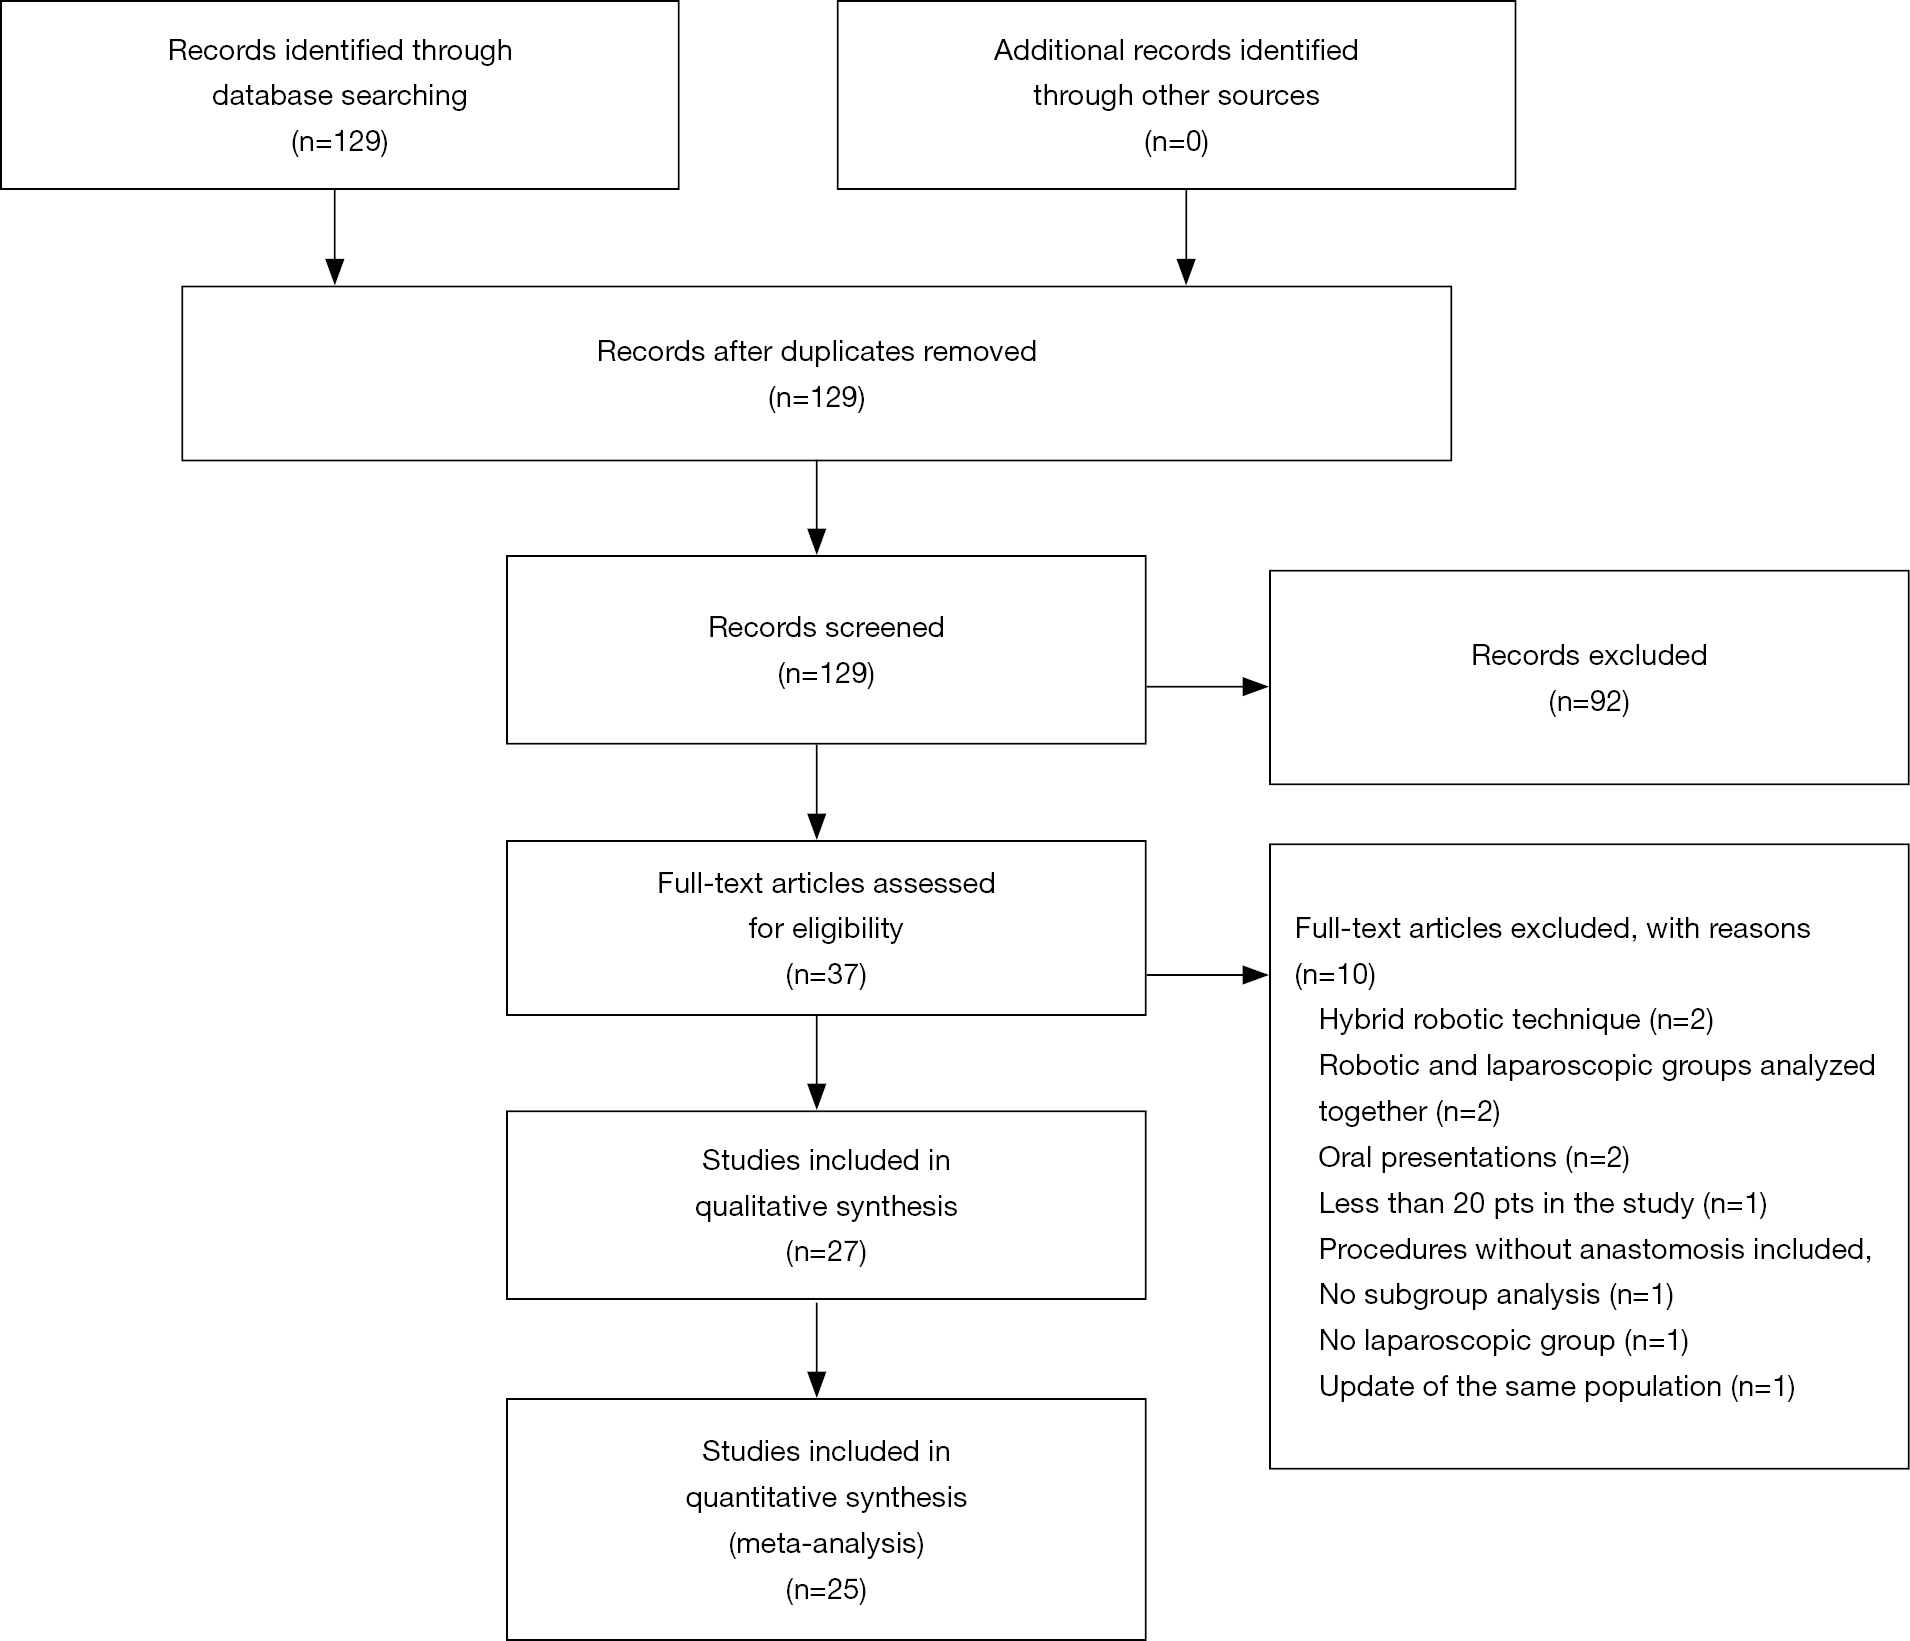 Advantages Of Robotic Right Colectomy Over Laparoscopic Right Colectomy Beyond The Learning Curve A Systematic Review And Meta Analysis Lauka Annals Of Laparoscopic And Endoscopic Surgery